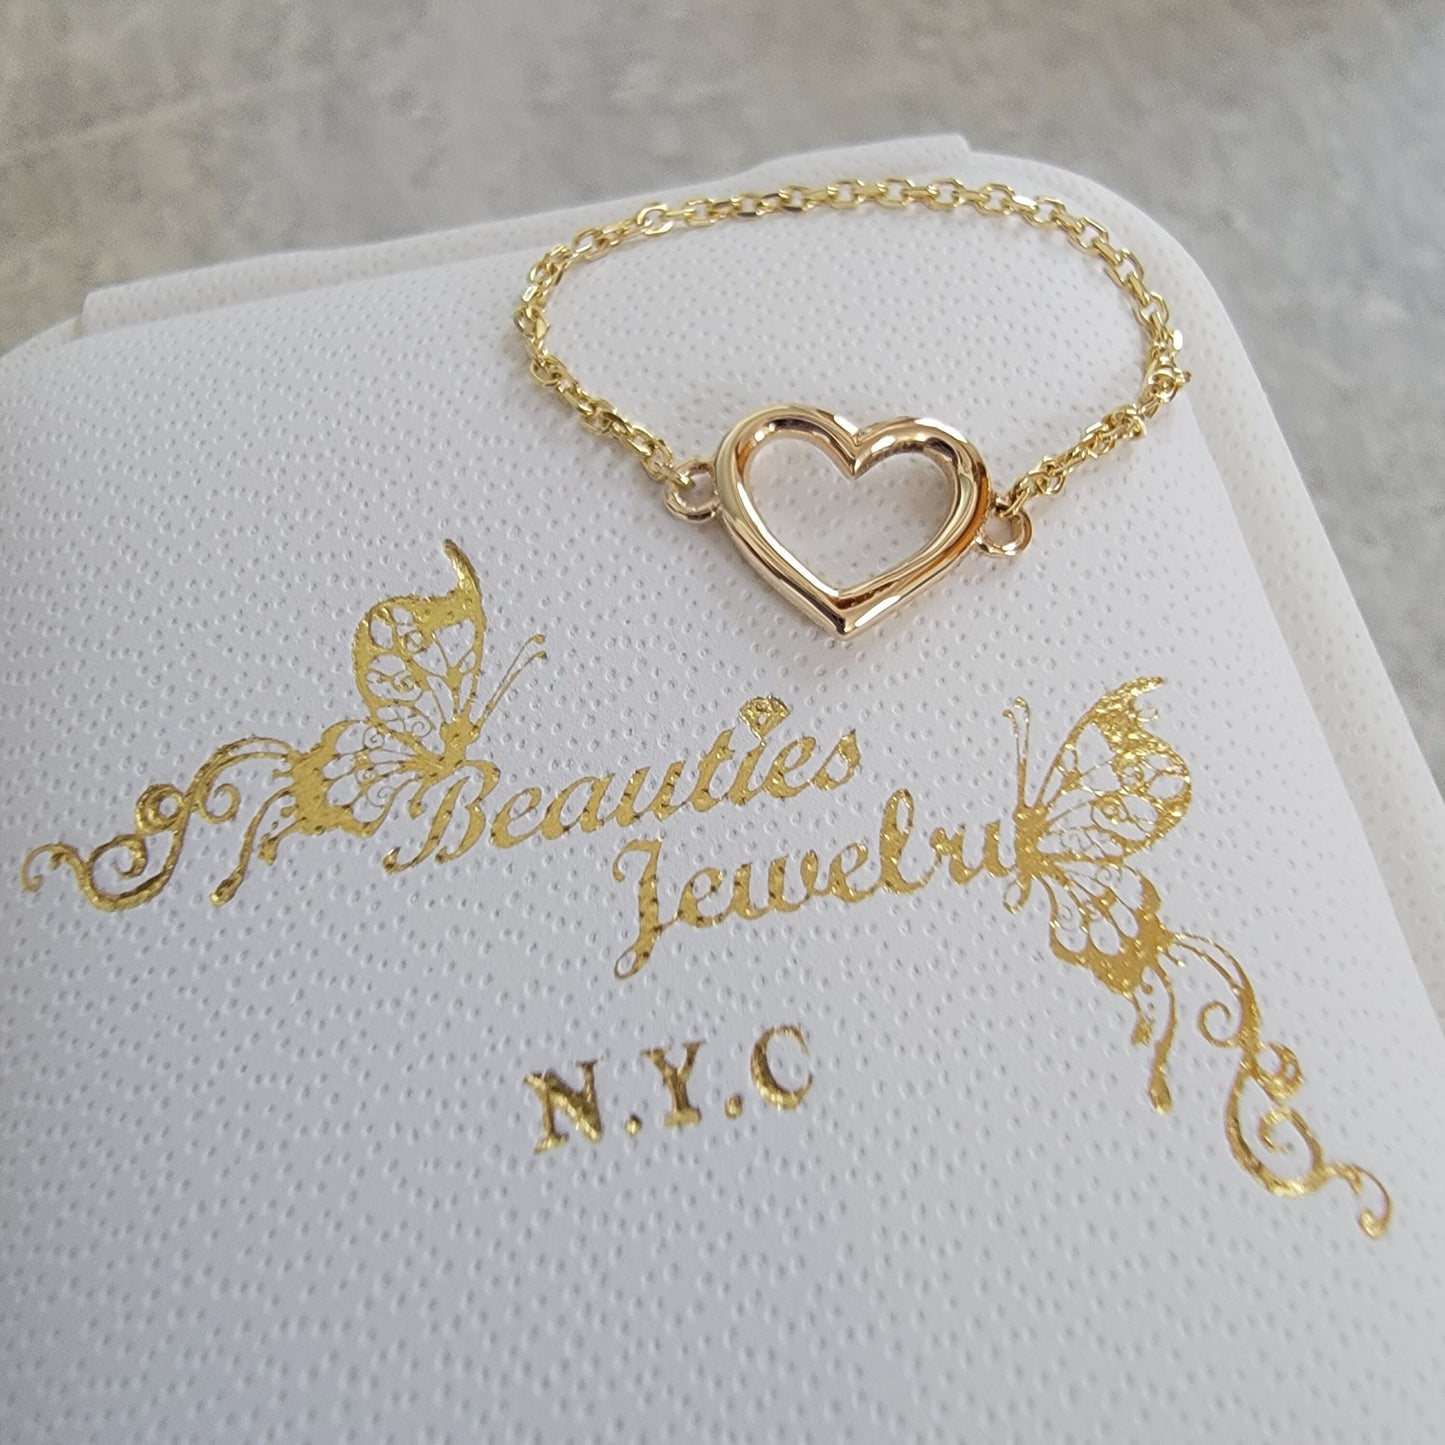 Gold Heart Chain Ring